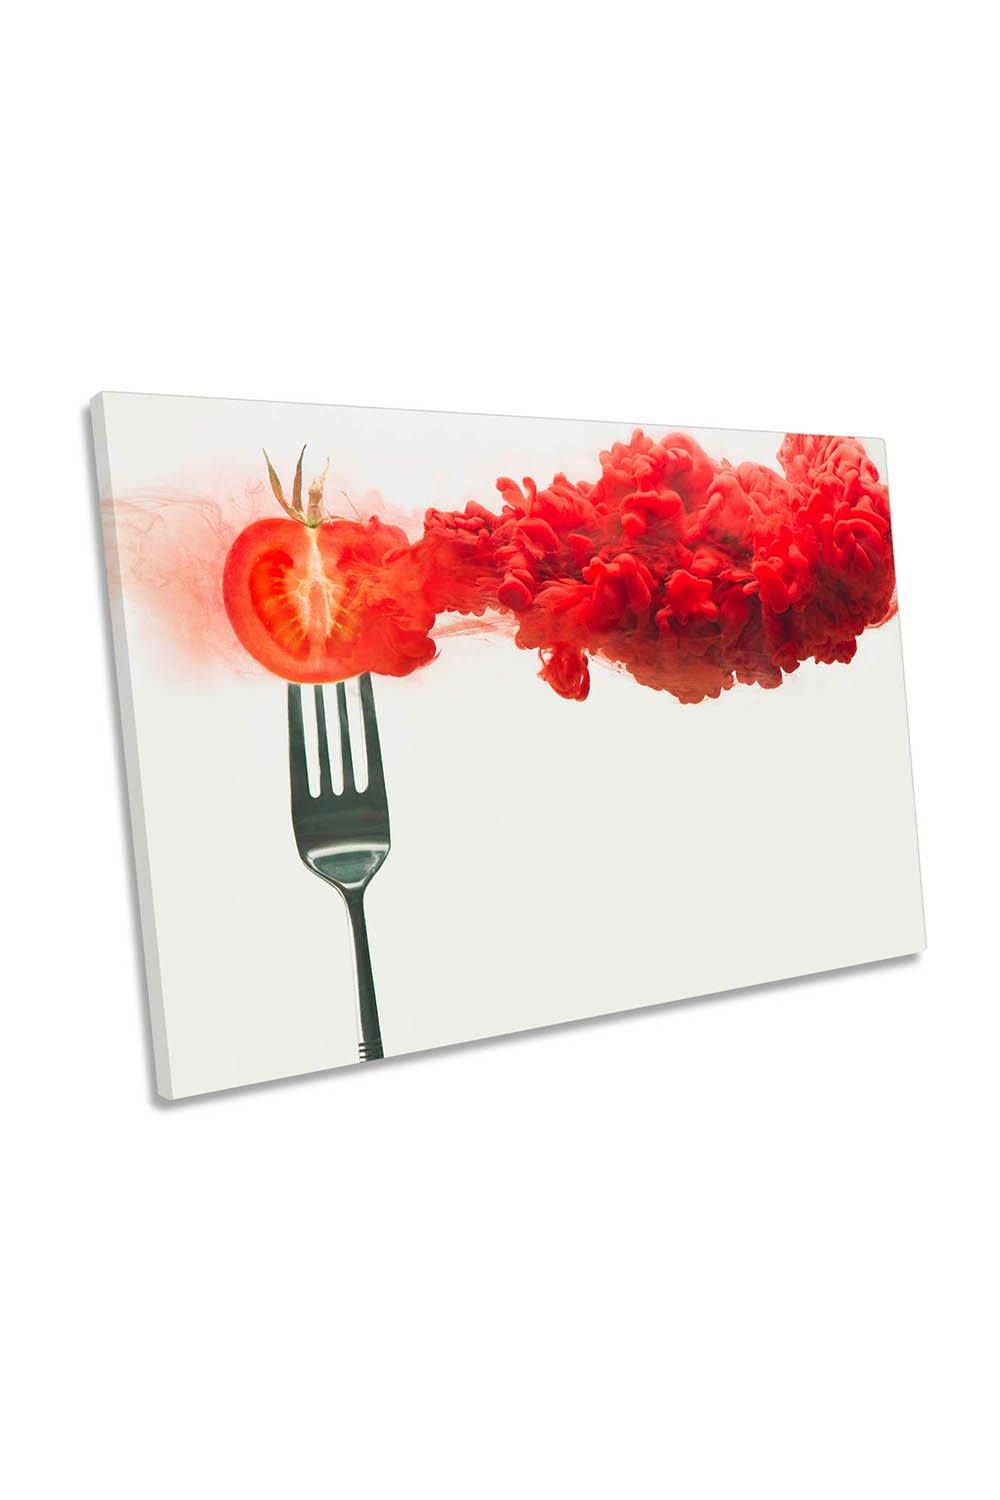 Disintegrated Red Tomato Kitchen Canvas Wall Art Picture Print